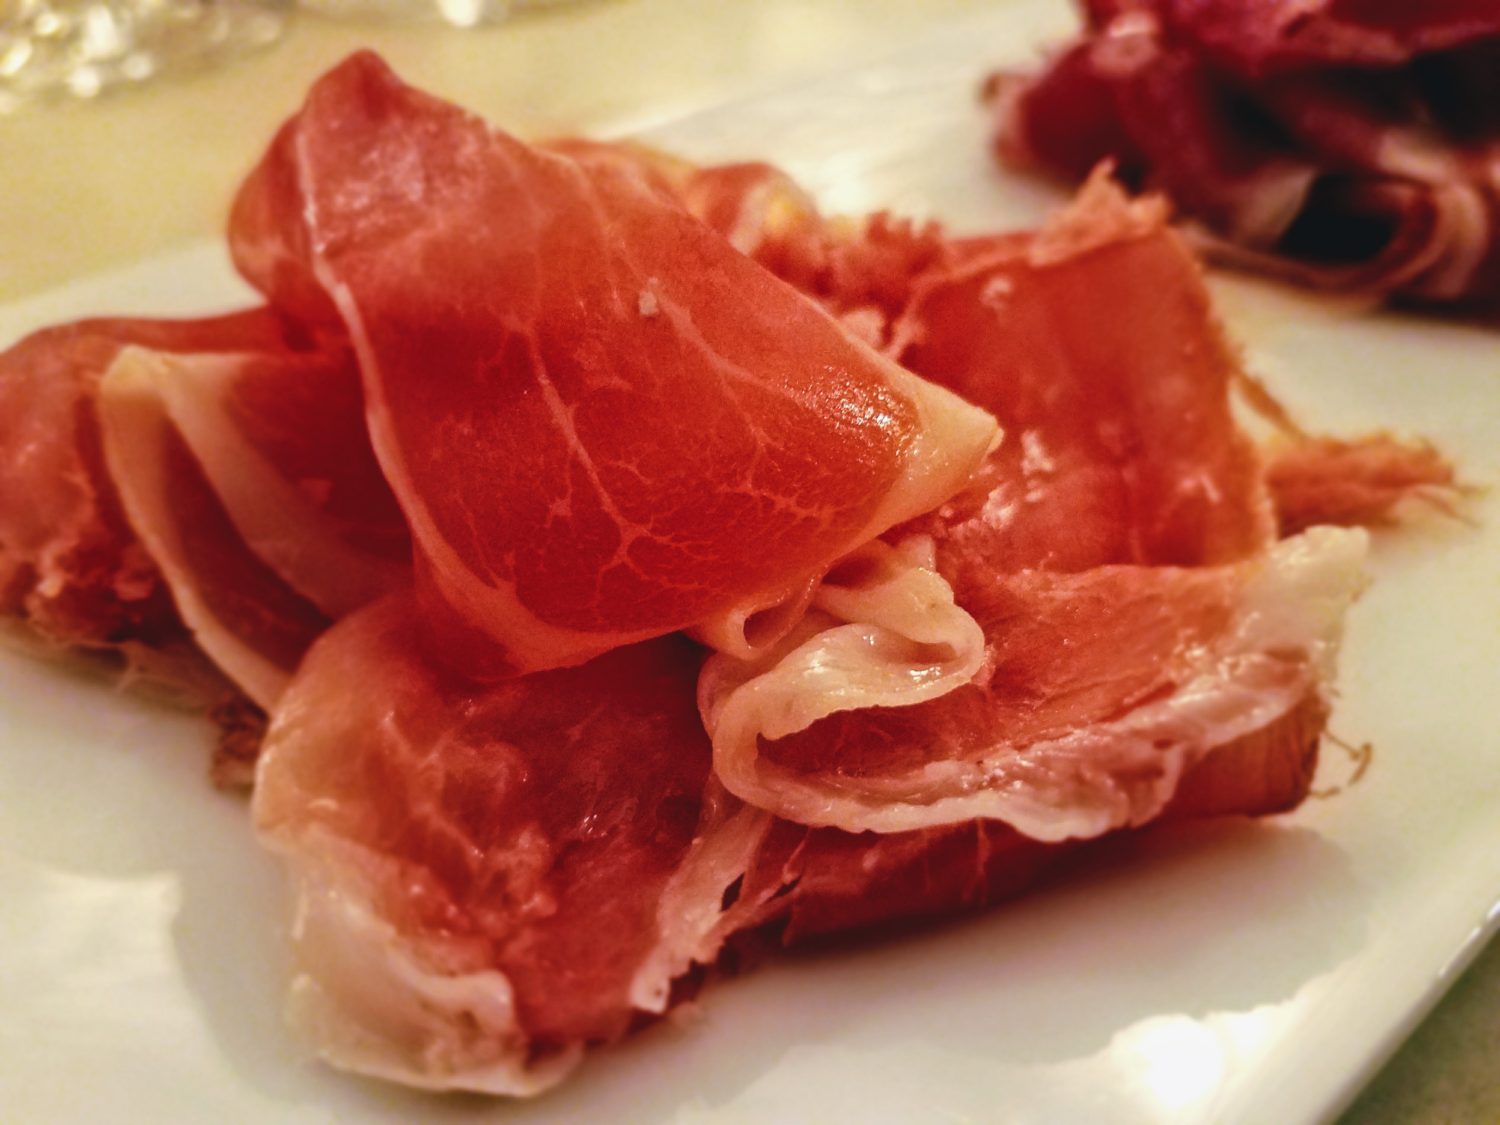 Plate of 2 Iberico Types